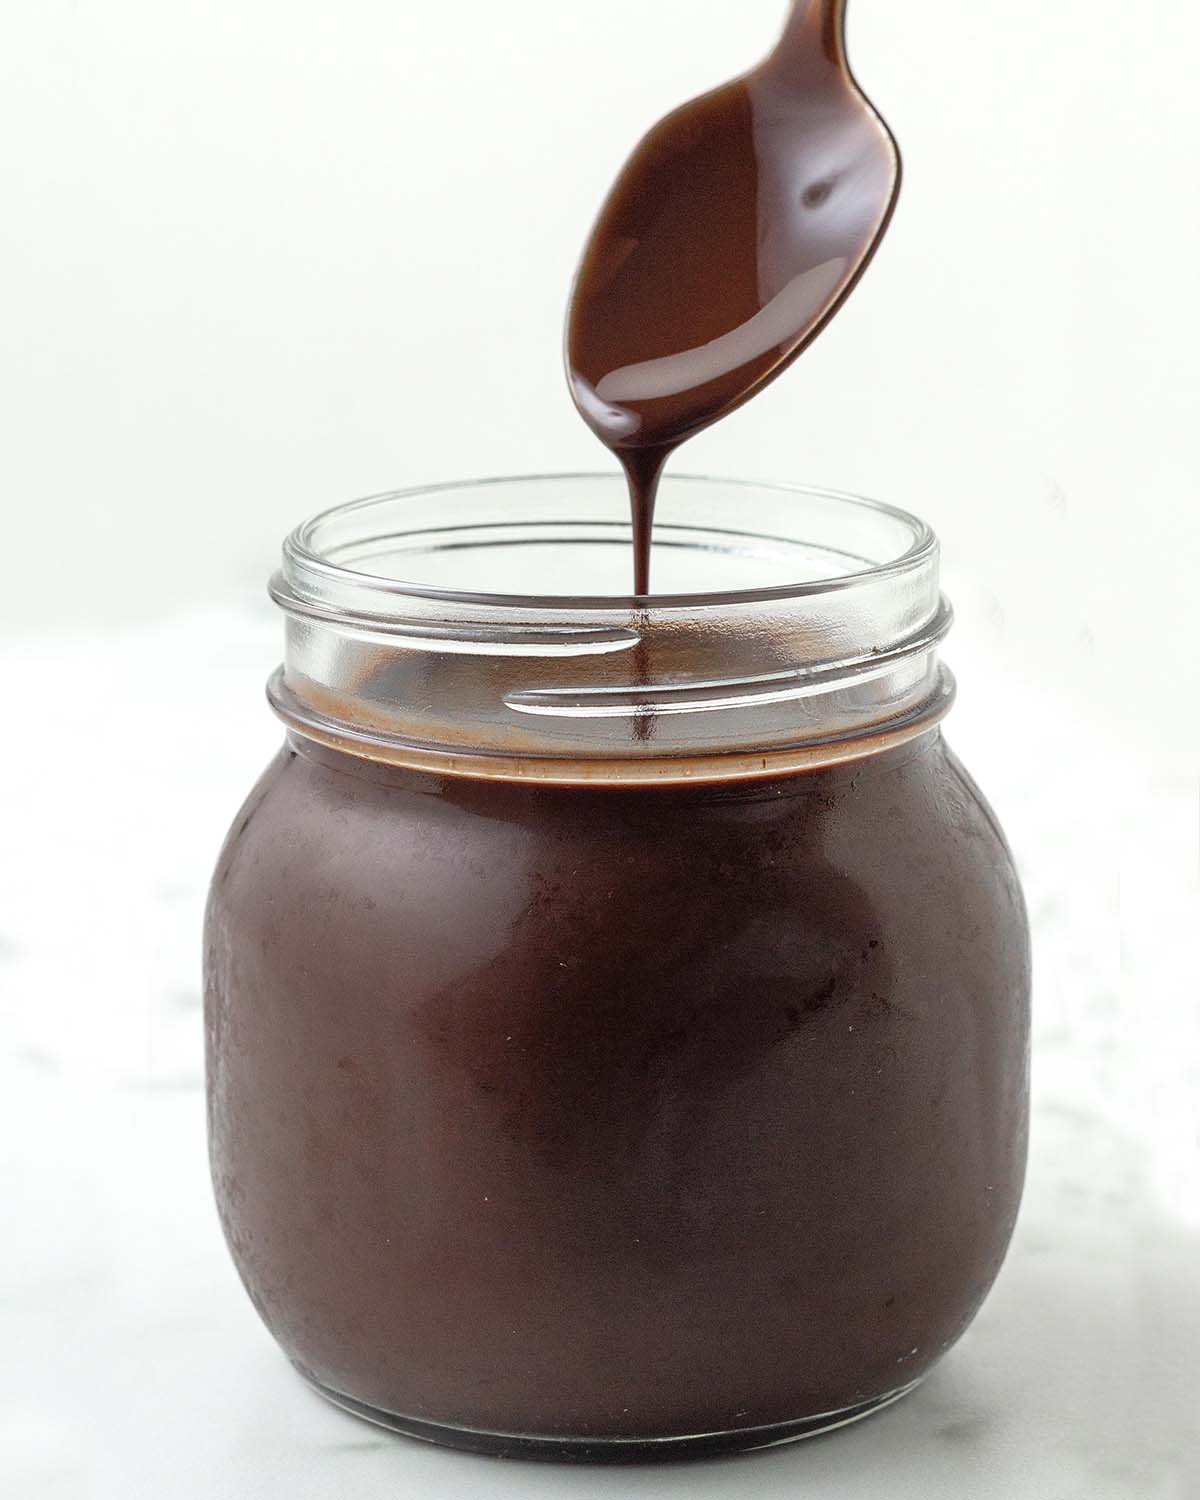 Chocolate syrup being poured from a spoon into a jar of more syrup.